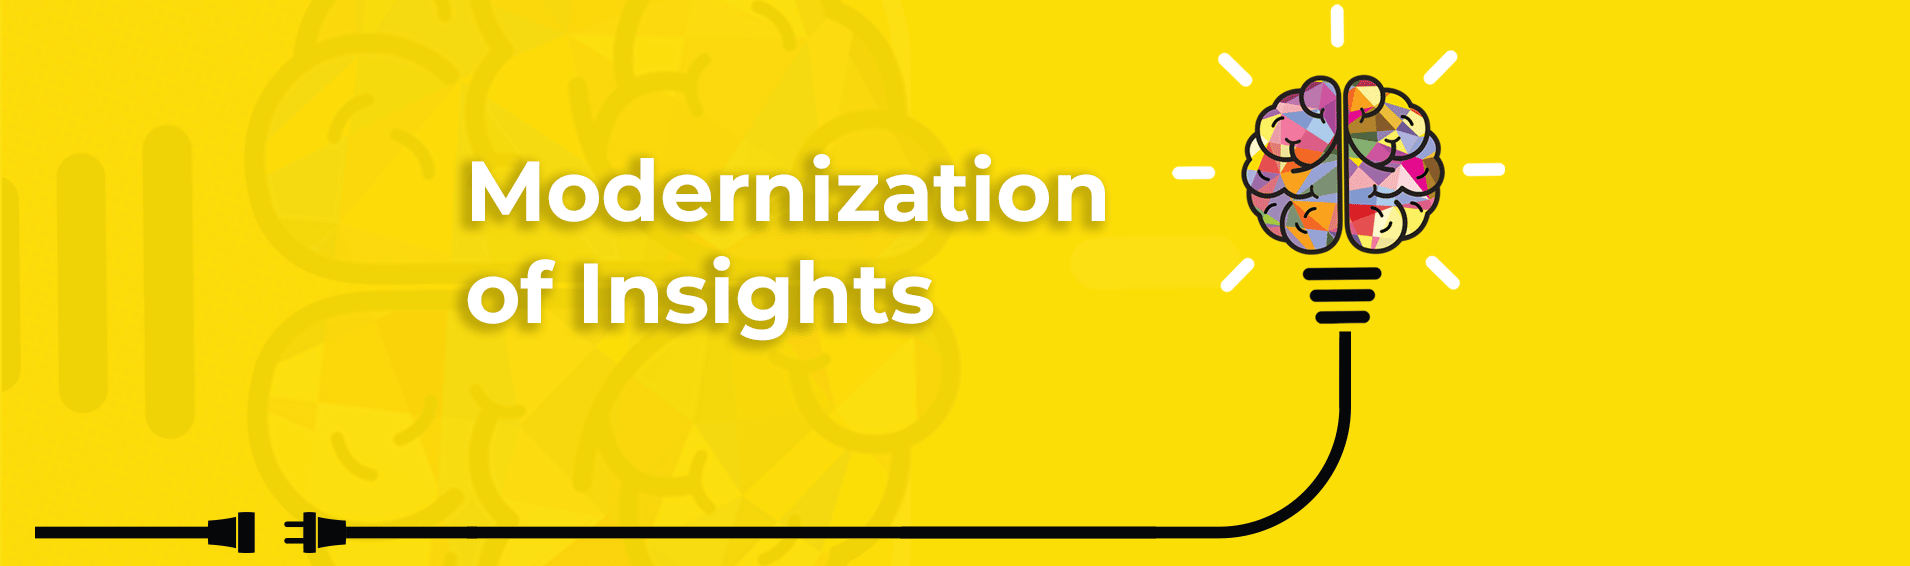 Modernization of Insights: Challenges and Right Approach